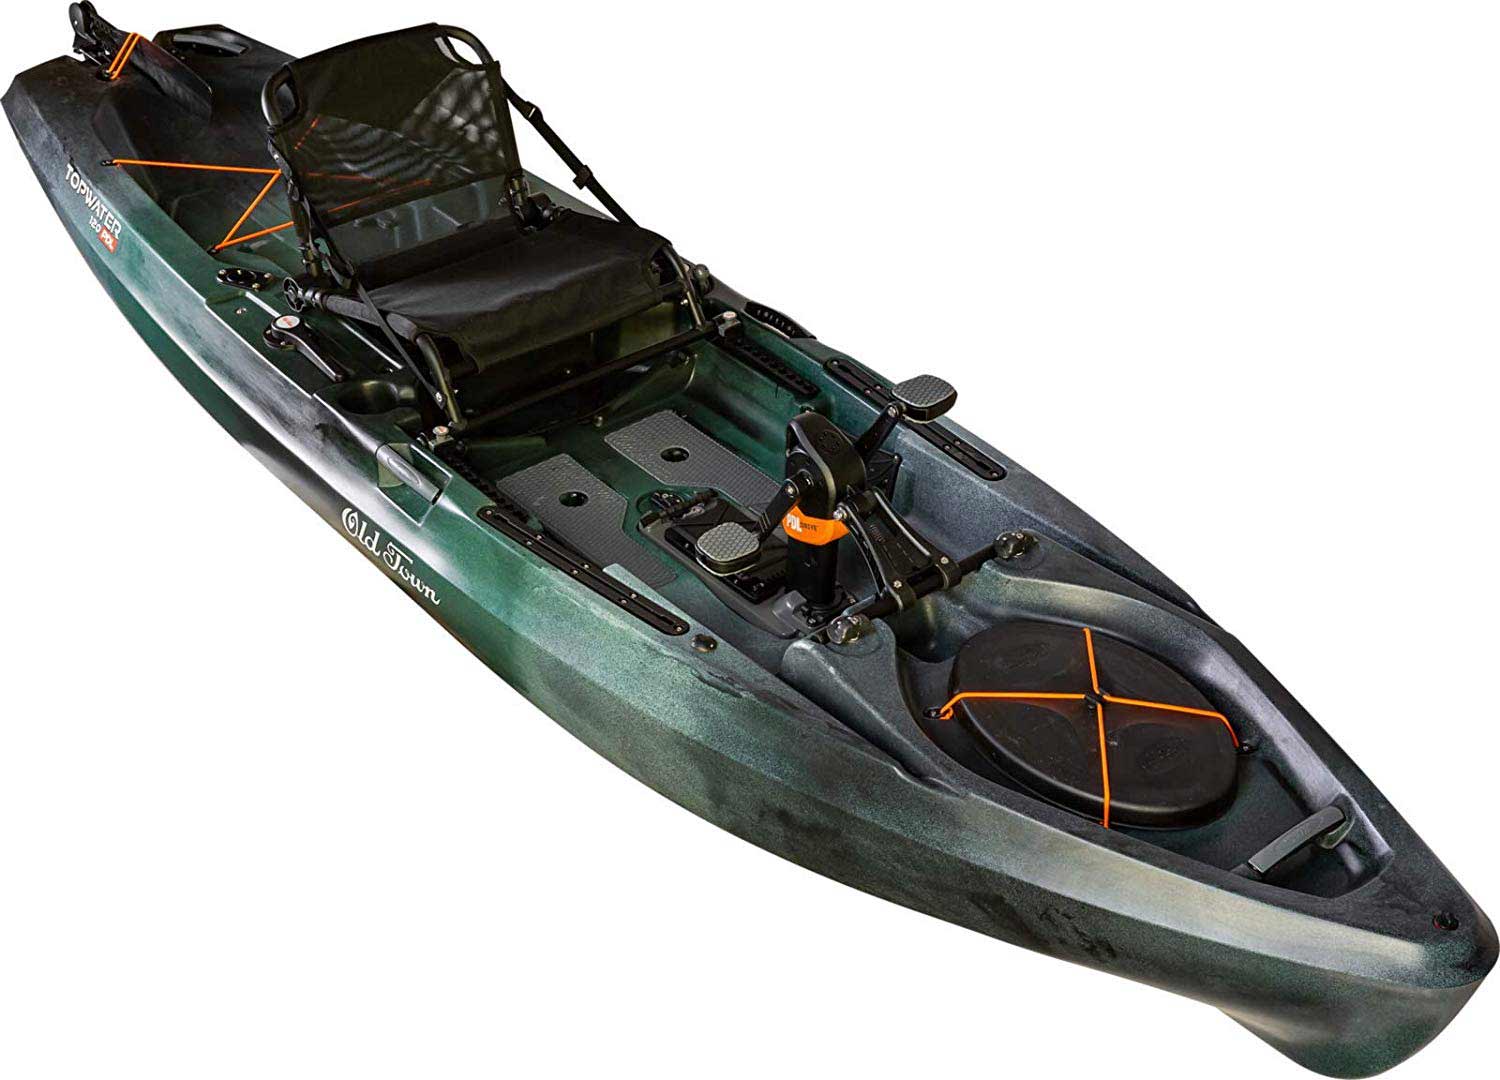 The 10 Best Gifts to Buy Kayak Anglers This Season